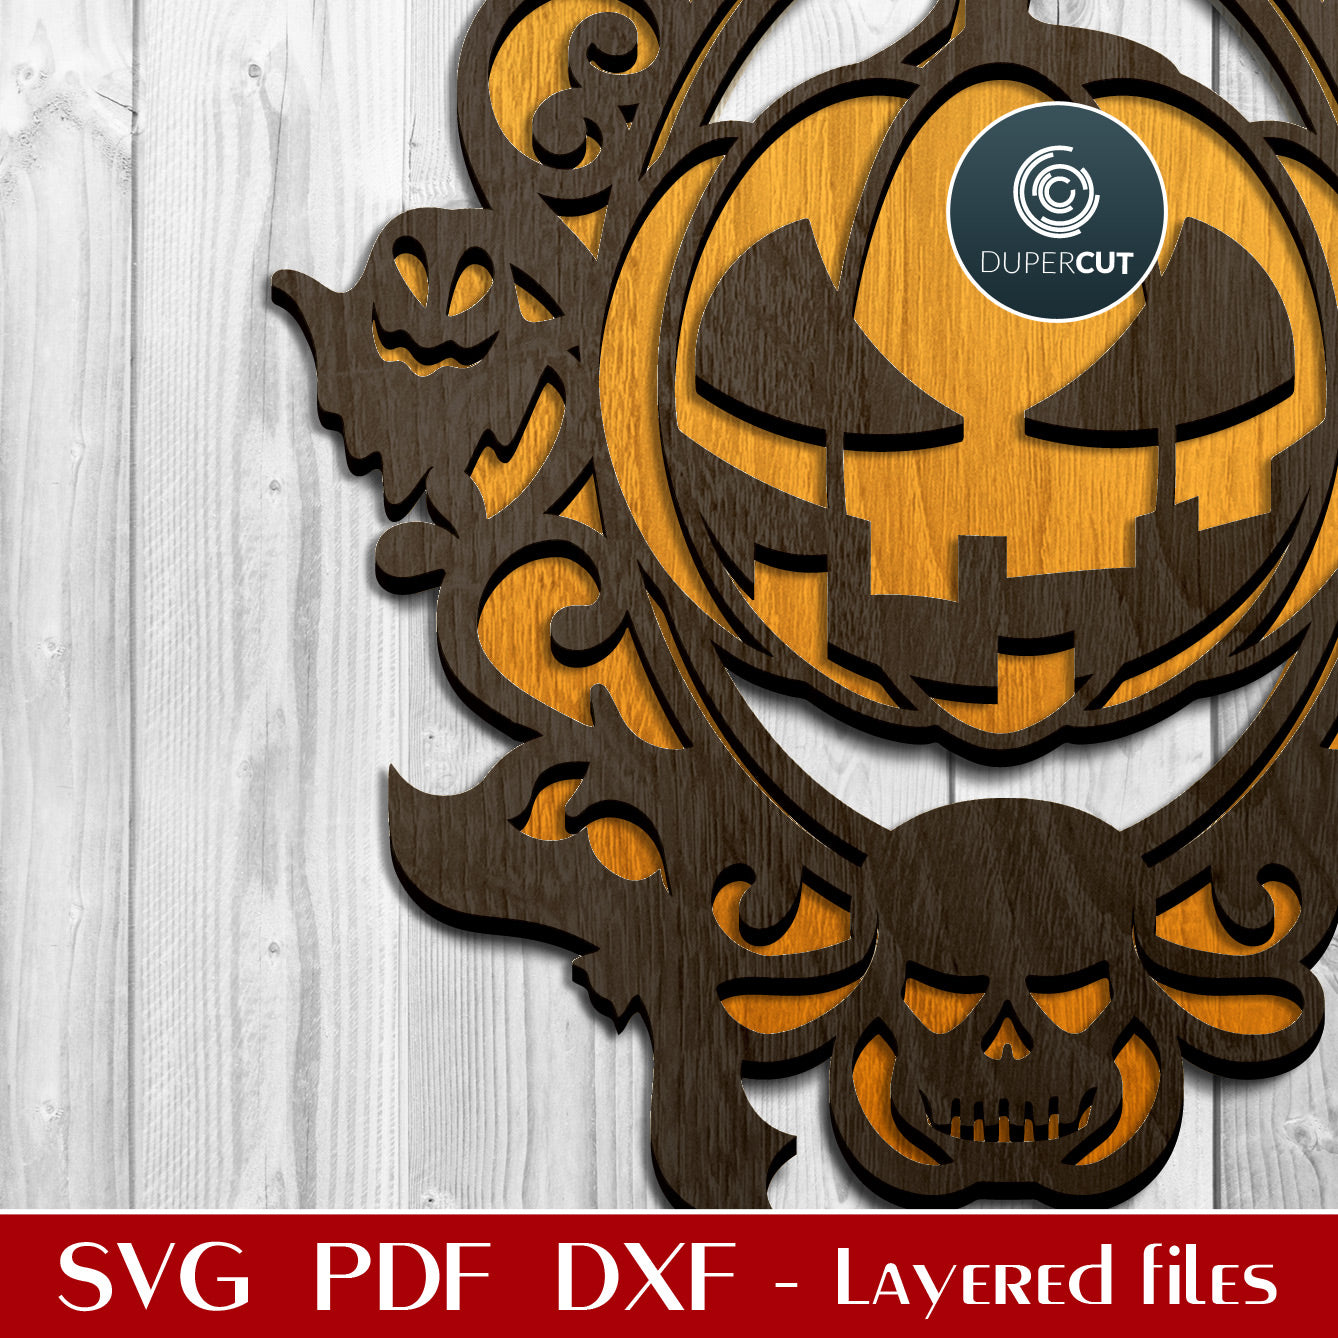 Halloween frame with pumpkin, skulls and ghosts - SVG DXF PNG layered cutting files for Glowforge, Cricut, Silhouette Cameo, CNC plasma laser machines by DuperCut